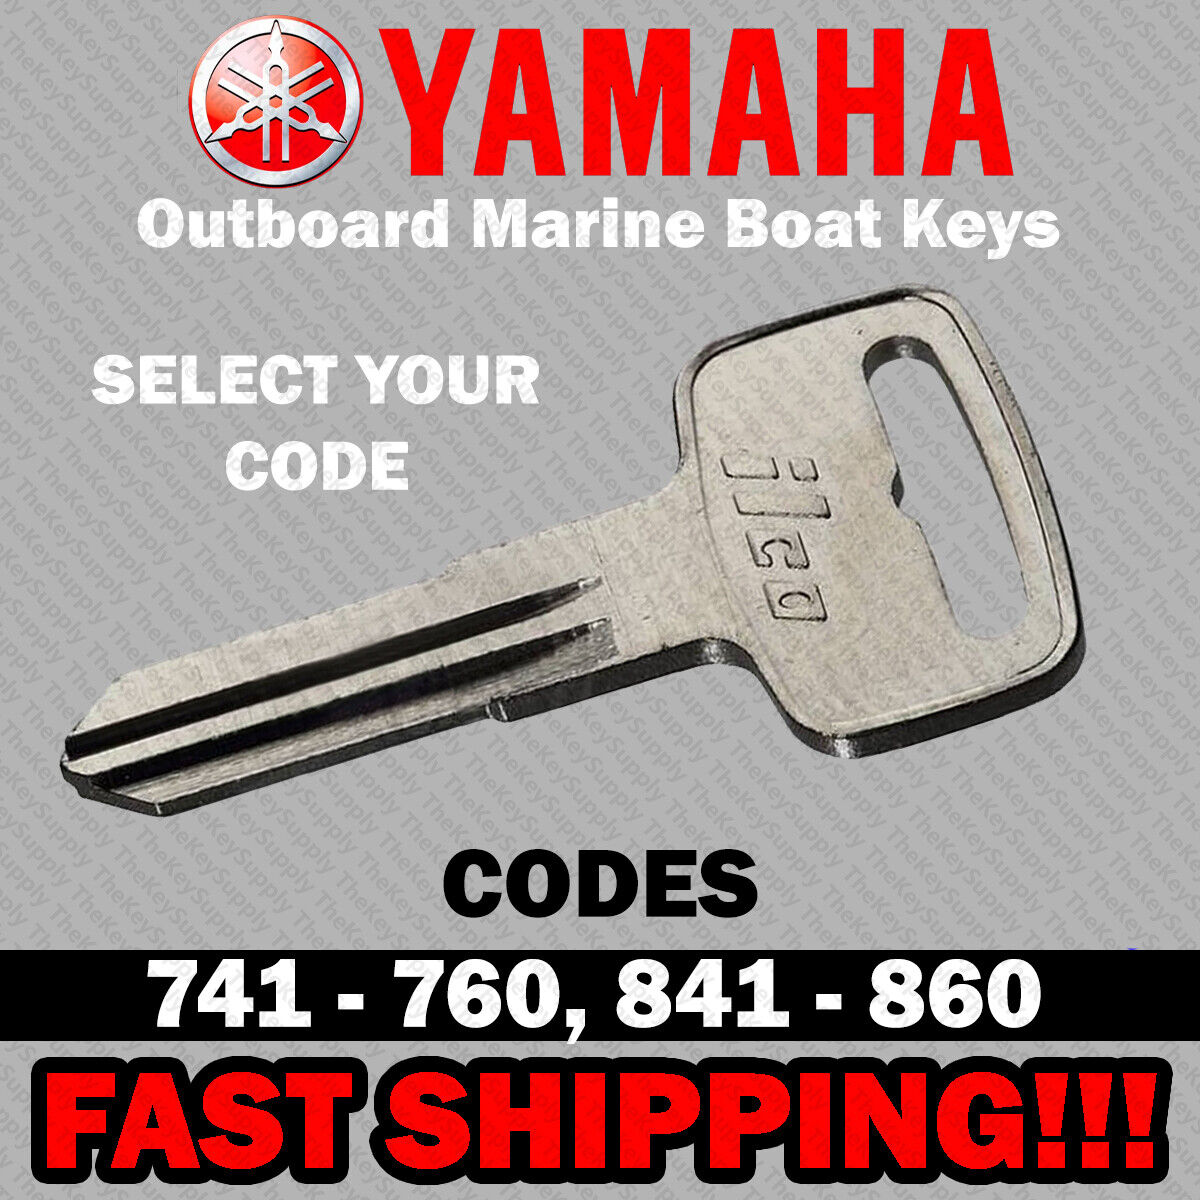 Yamaha Outboard Marine Boat Key Cut to Your Code 741 - 760, 841 - 860